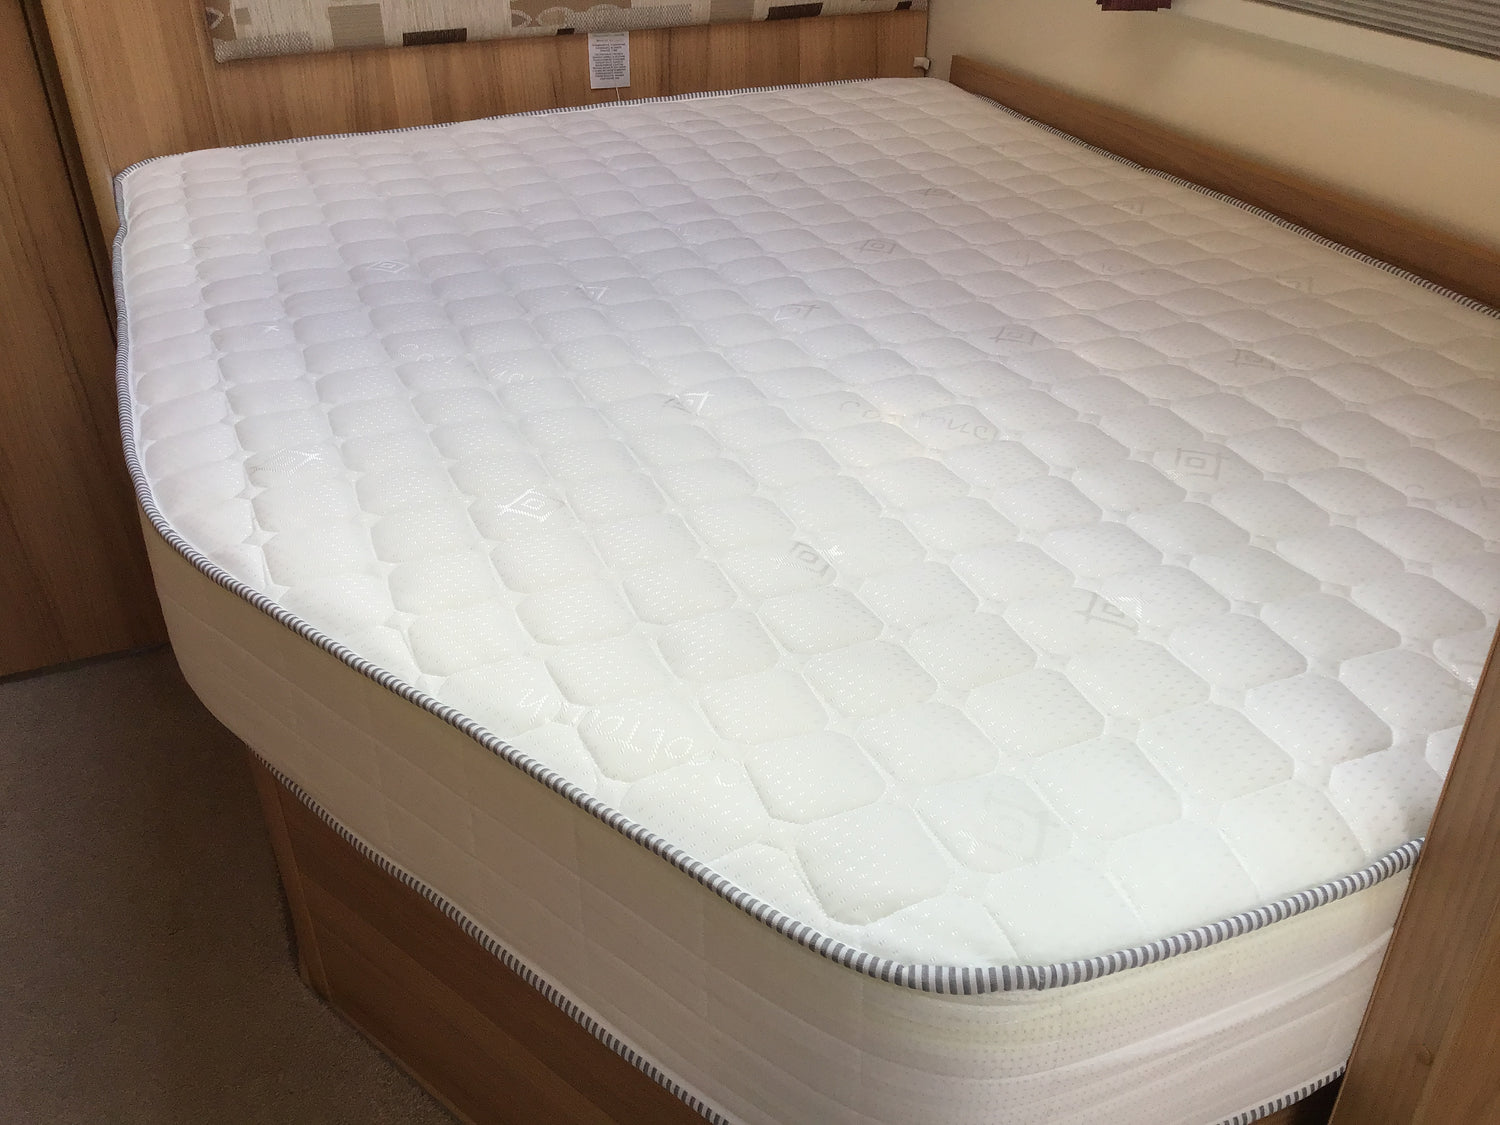 Full-size, made-to-measure memory foam mattress perfectly fitted on a bed base, showcasing its custom dimensions and comfort.